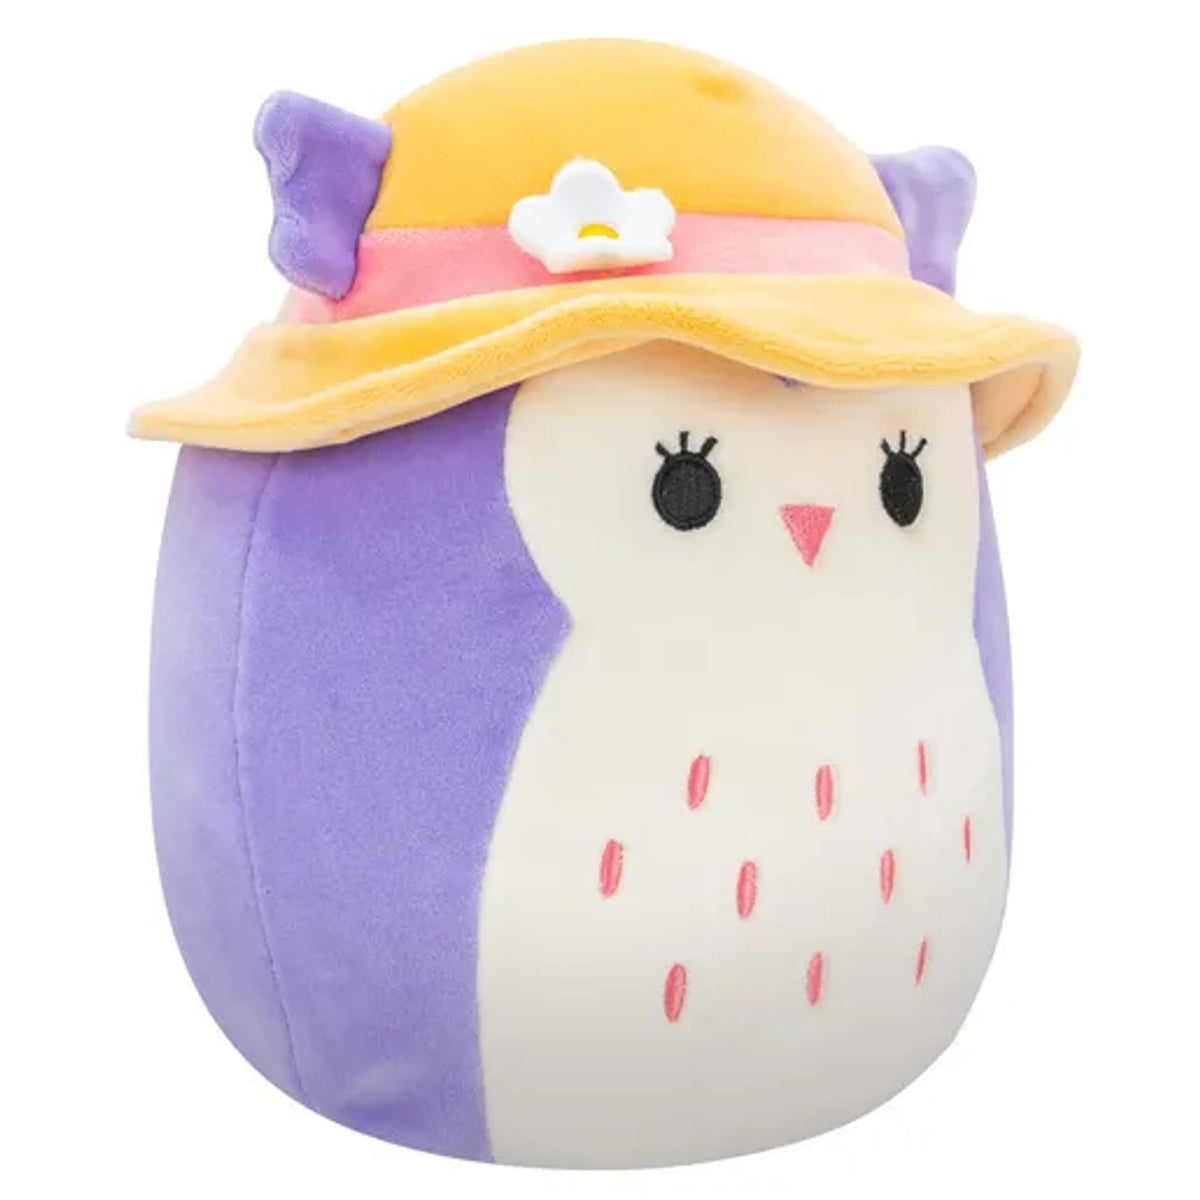 SQUISHMALLOW 7.5 INCH - HOLLY